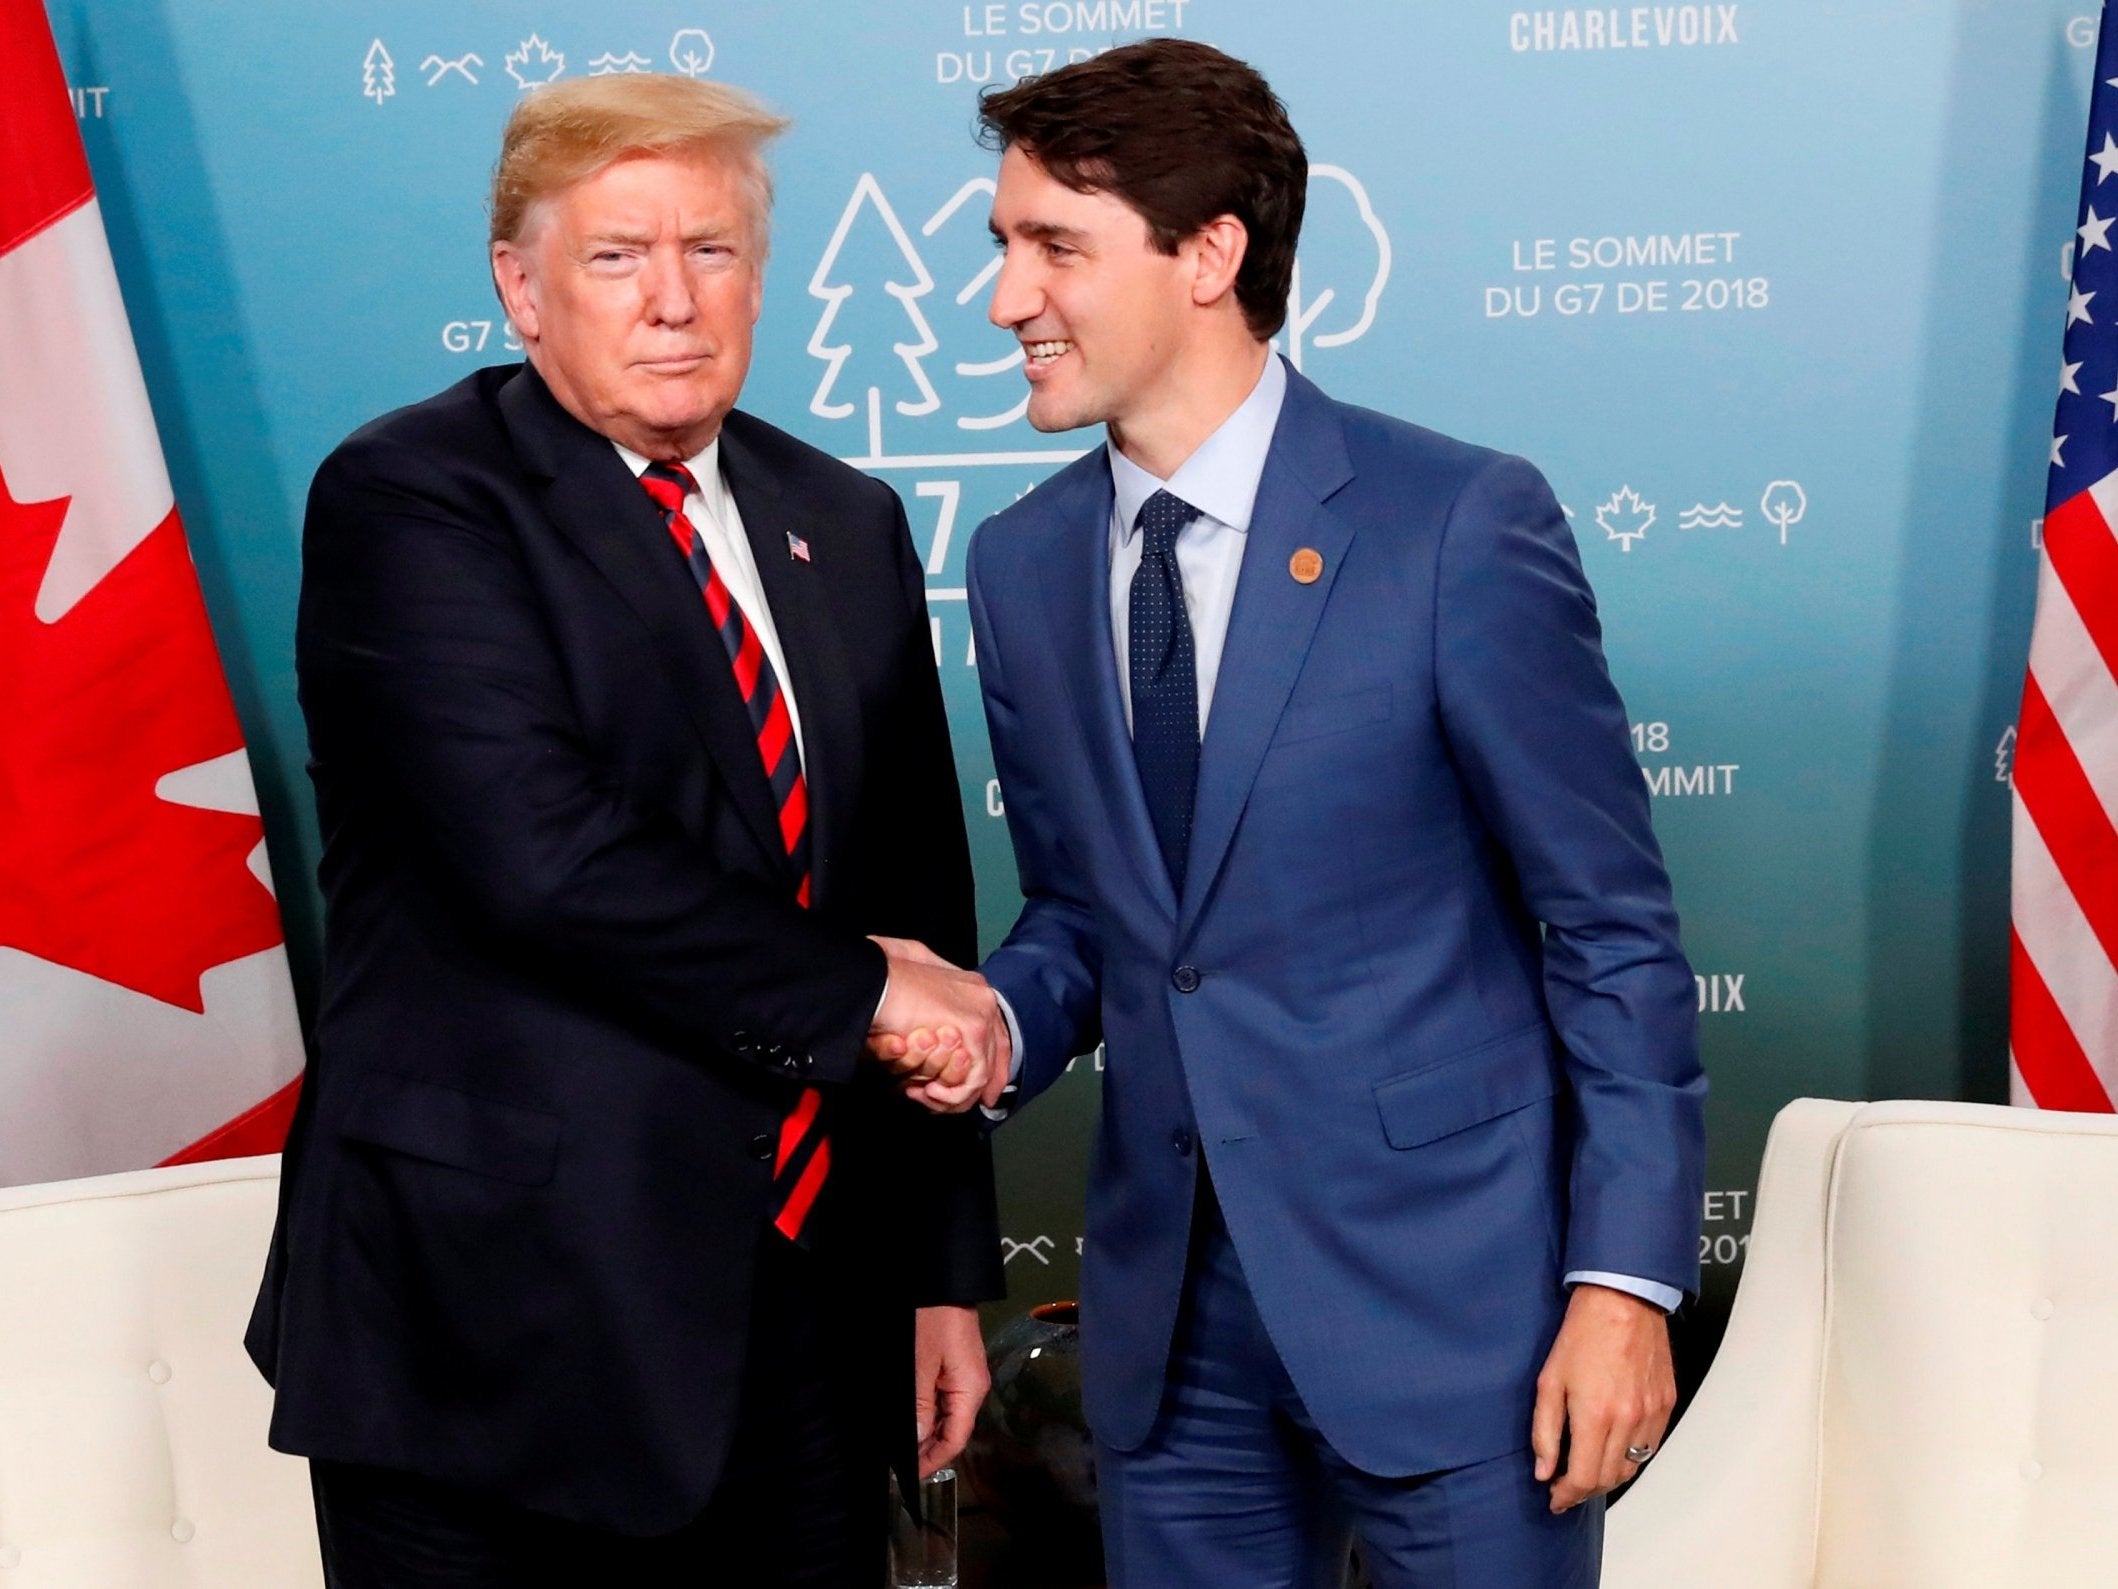 Relations between Ottawa and Washington soured in the aftermath of a disastrous G-7 summit in Quebec in June